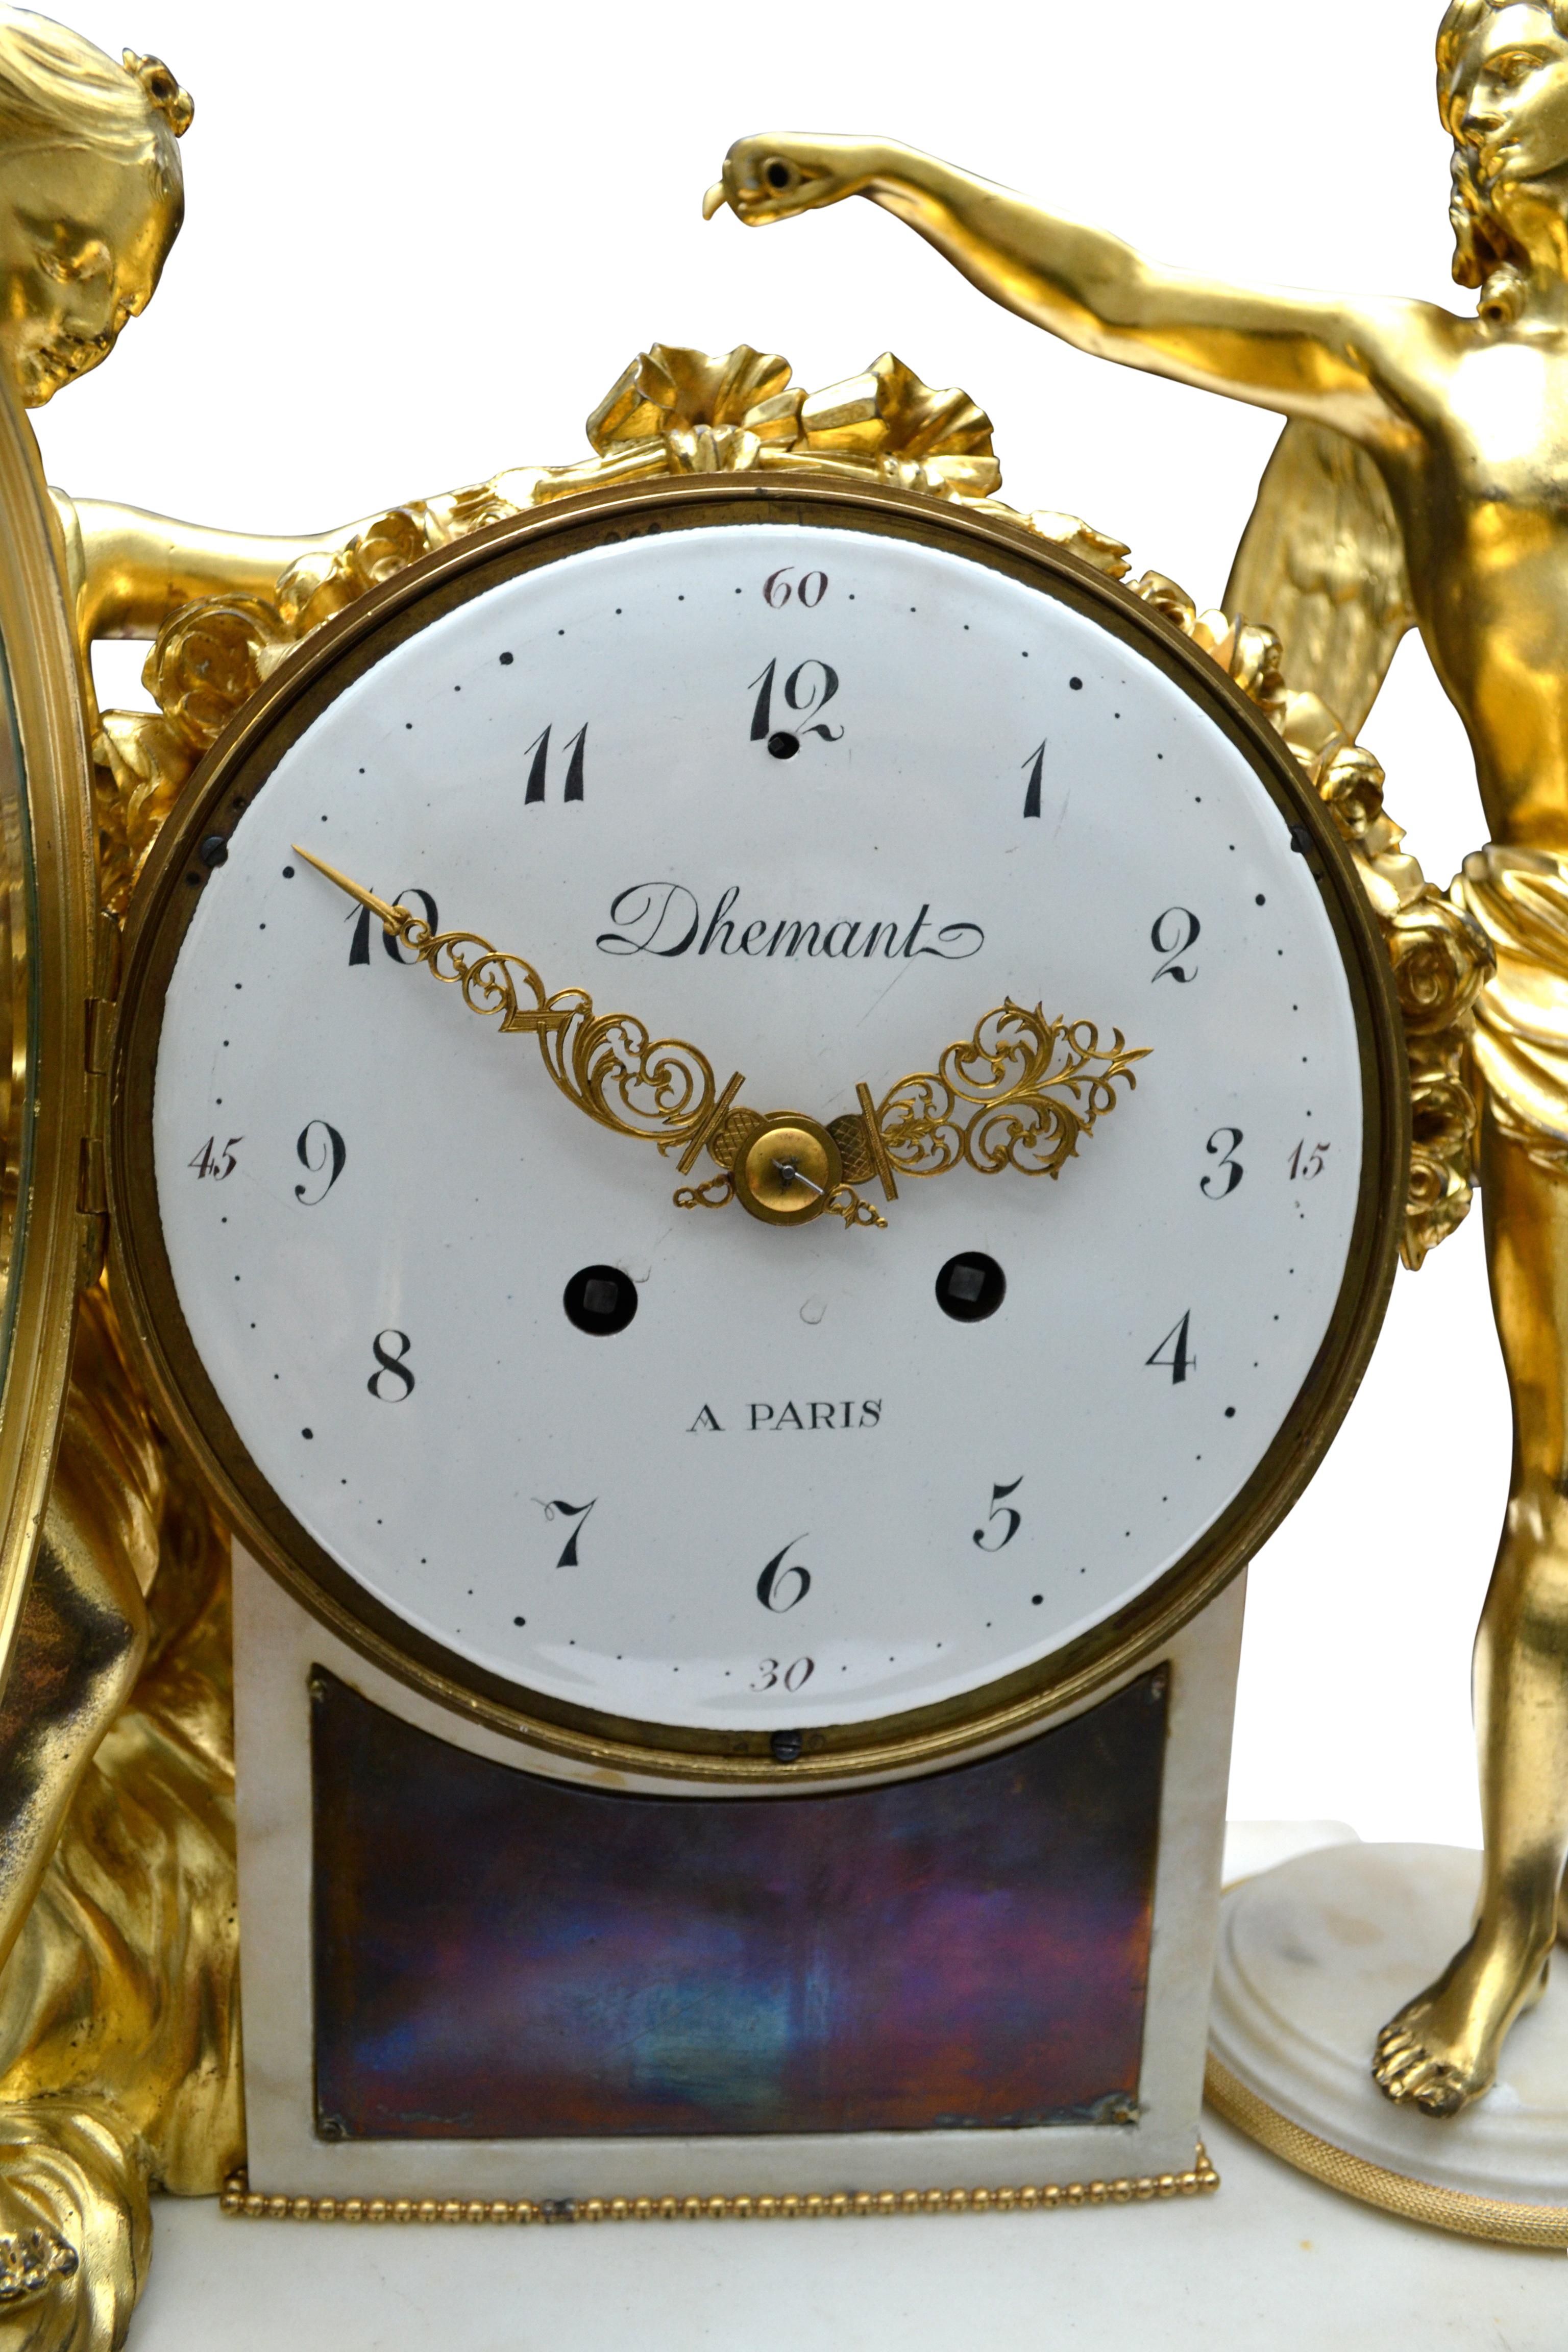 Louis XVI Allegorical Figurative Clock Depicting Venus Being Crowned by Amour For Sale 2